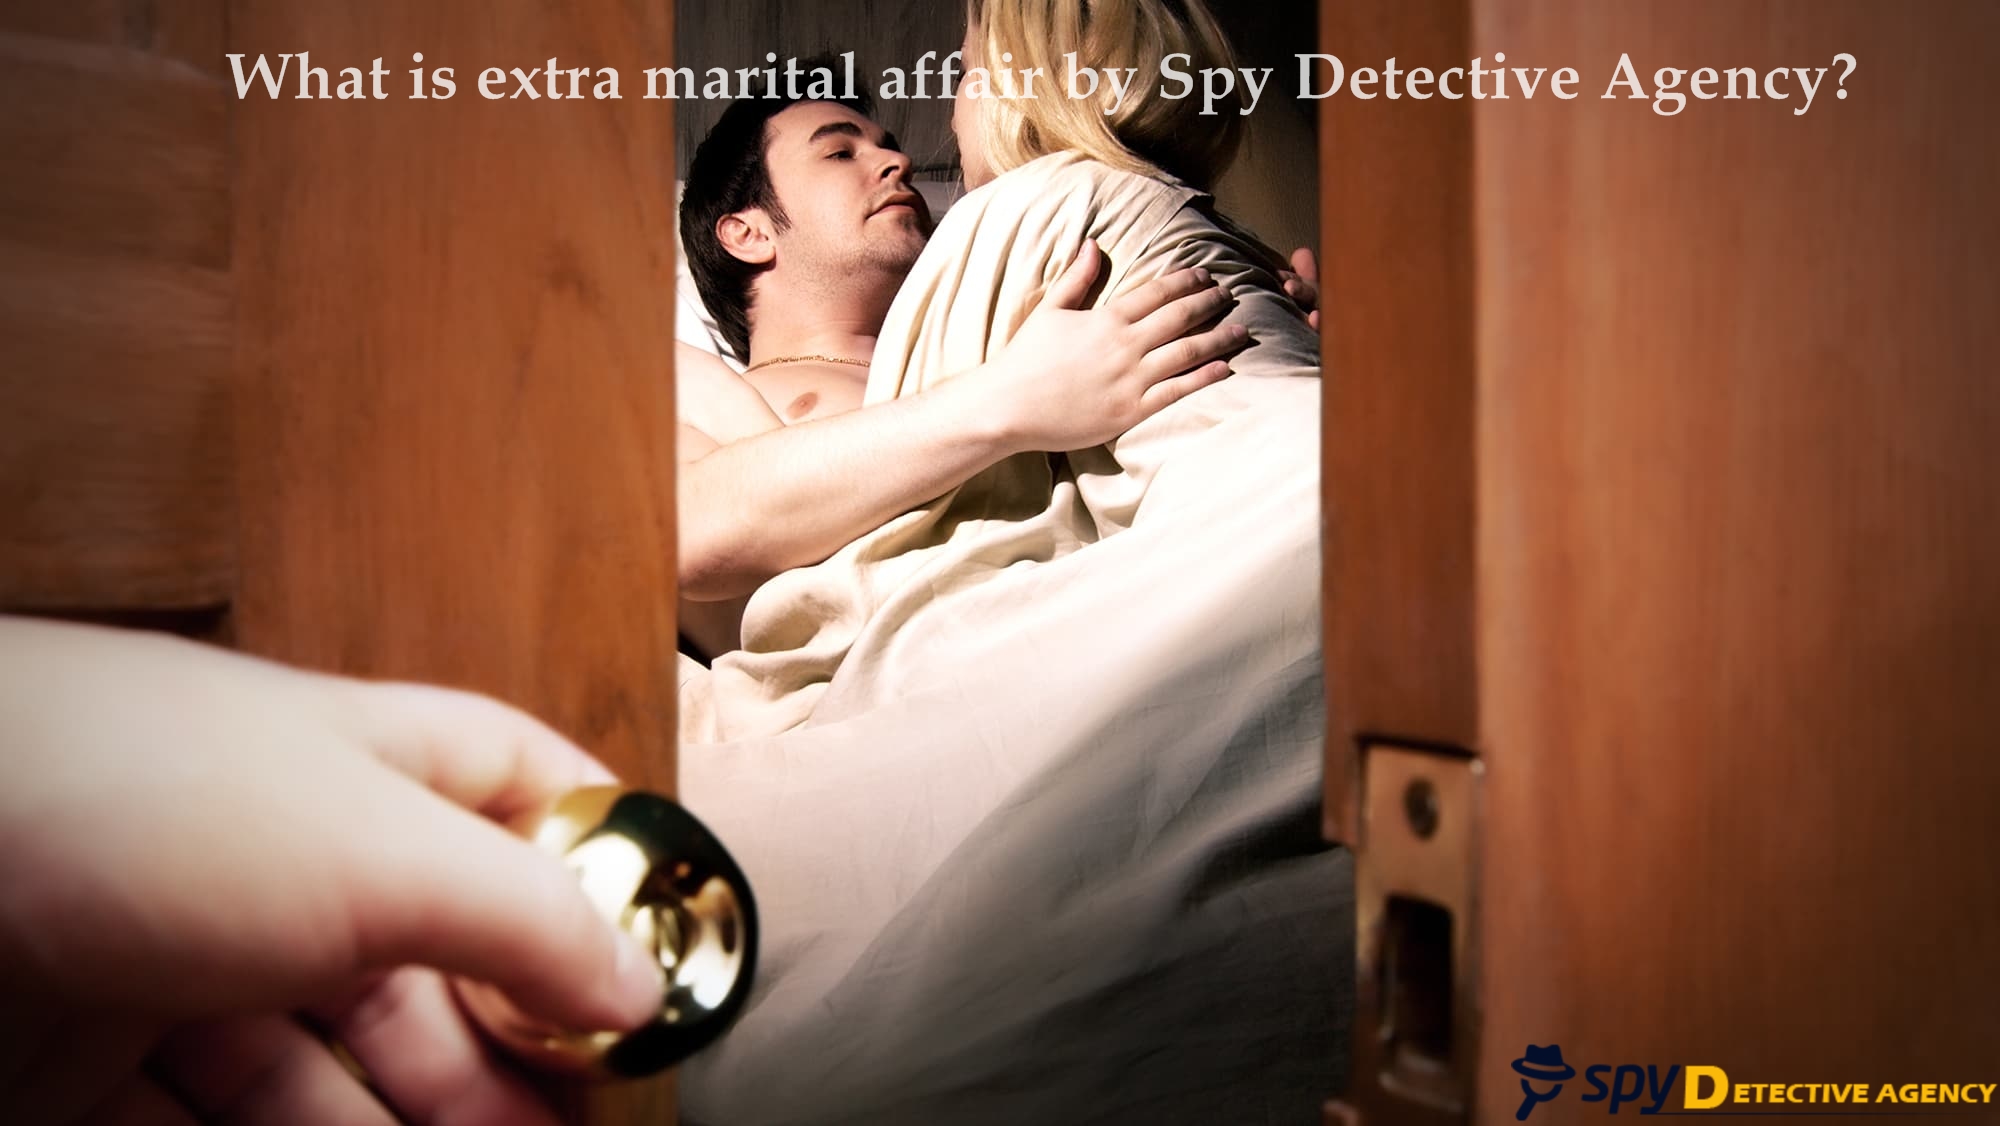 What is extra marital affair by Spy Detective Agency?